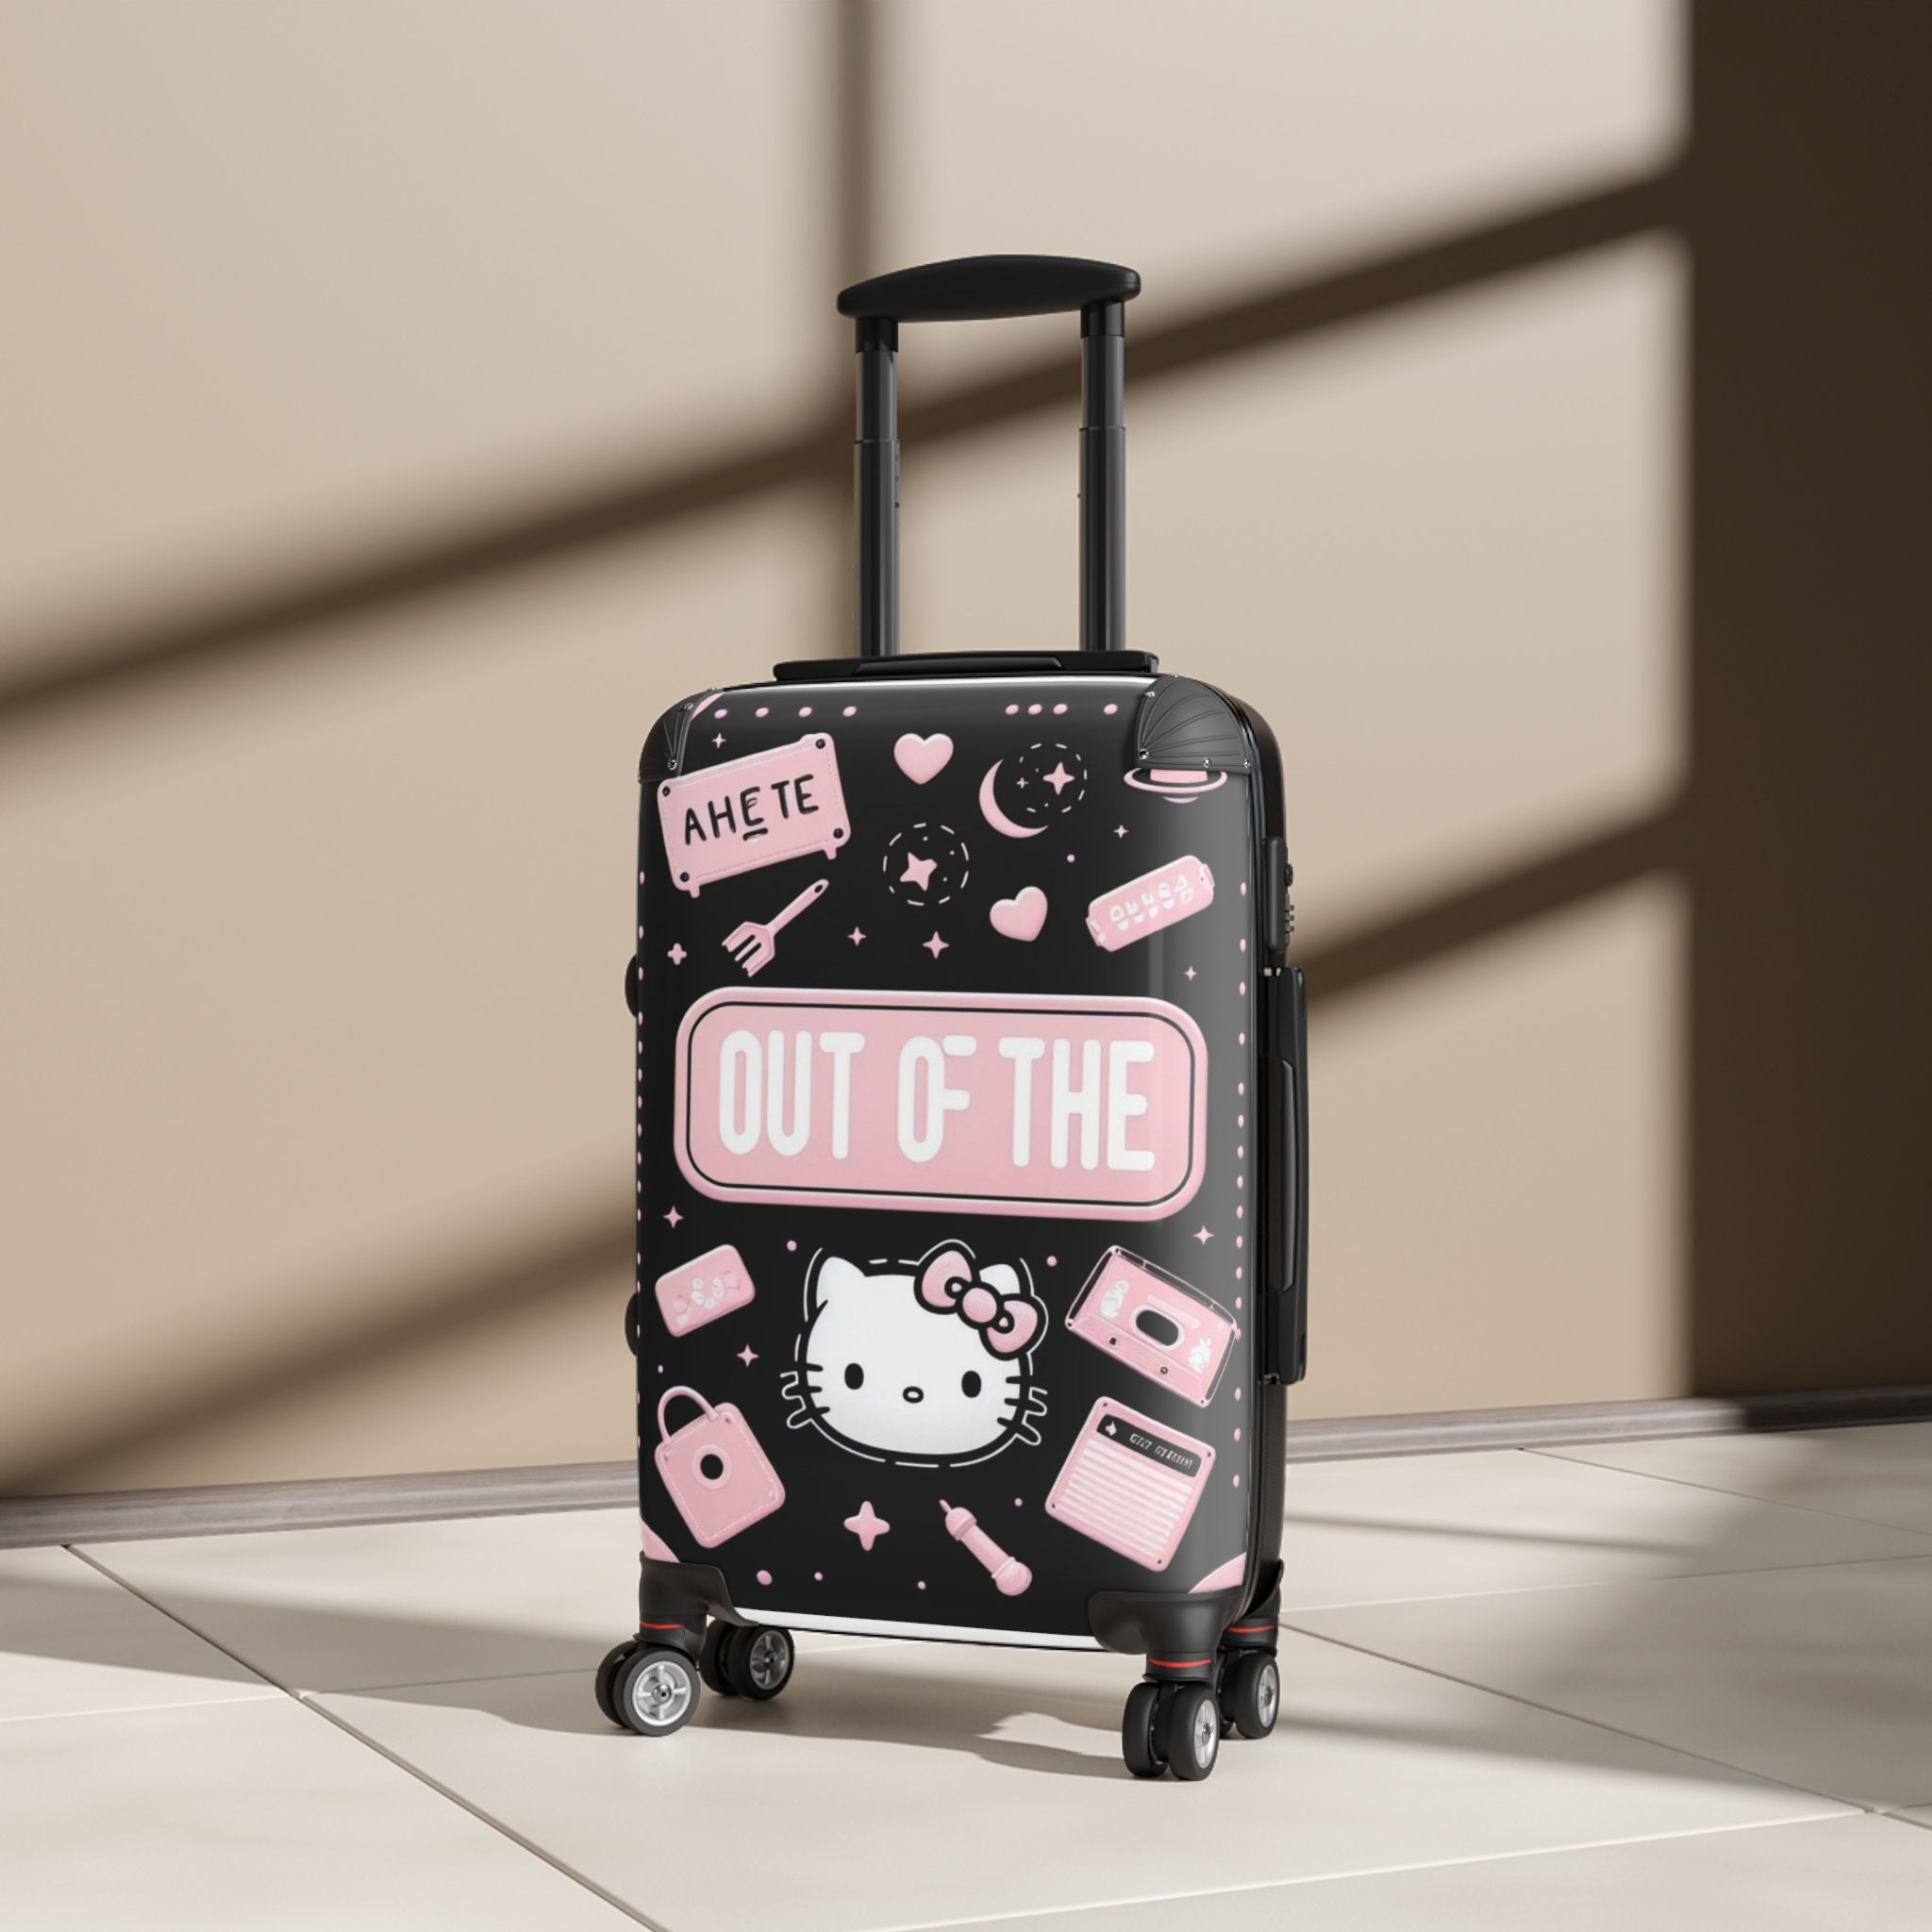 Cute Hello Kitty Suitcases for fans